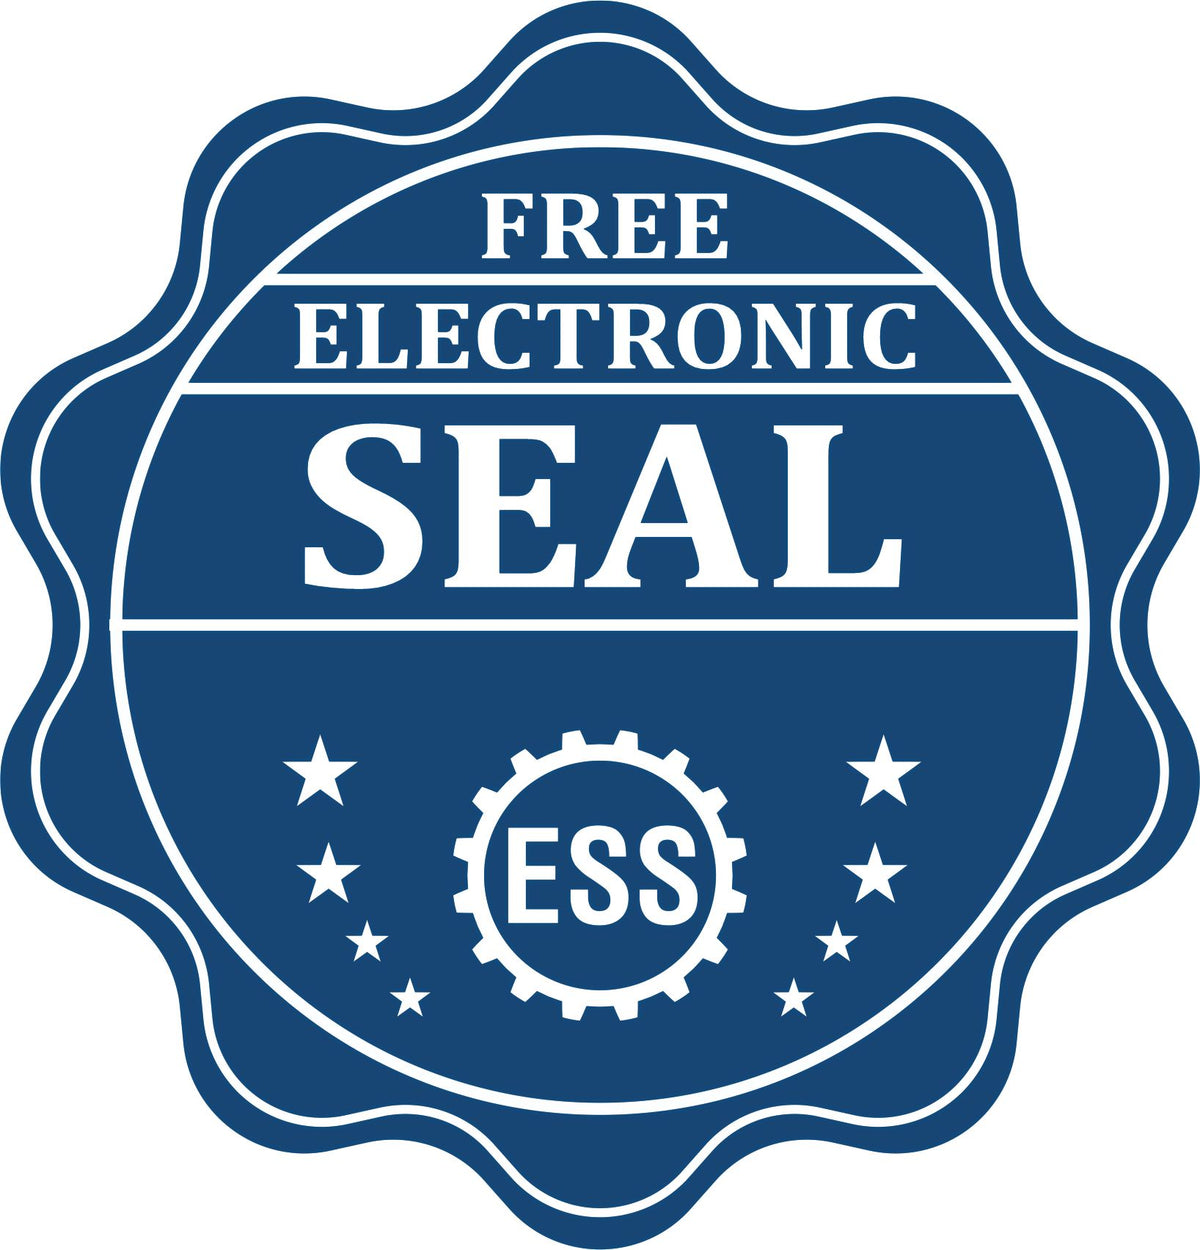 A badge showing a free electronic seal for the PSI Connecticut Notary Stamp with stars and the ESS gear on the emblem.